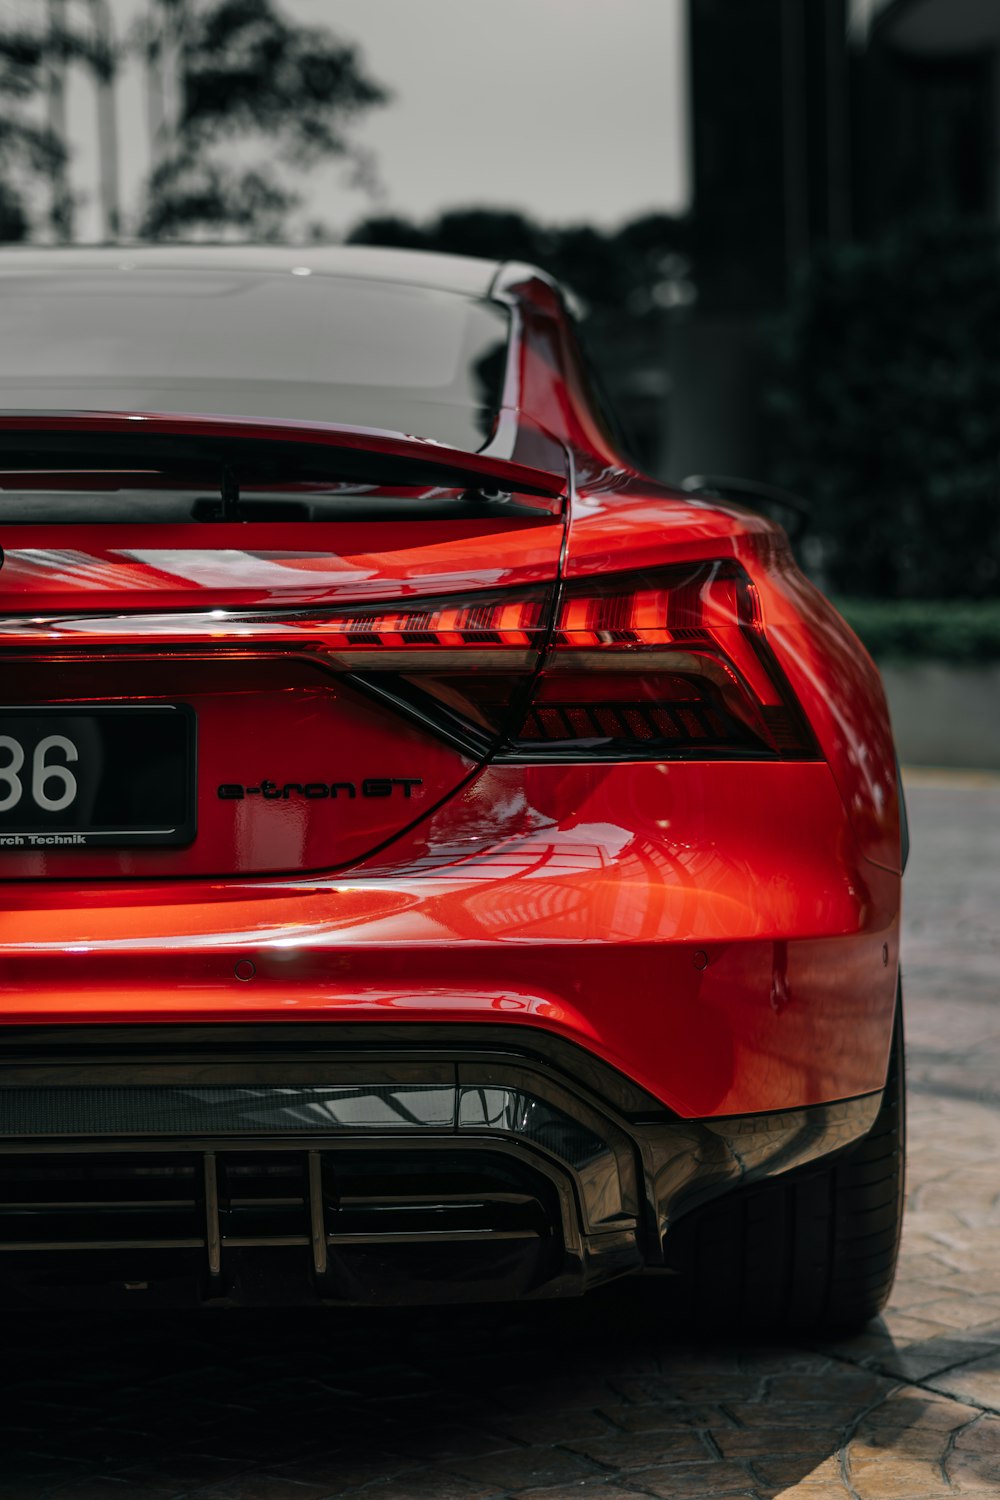 the back end of a red sports car